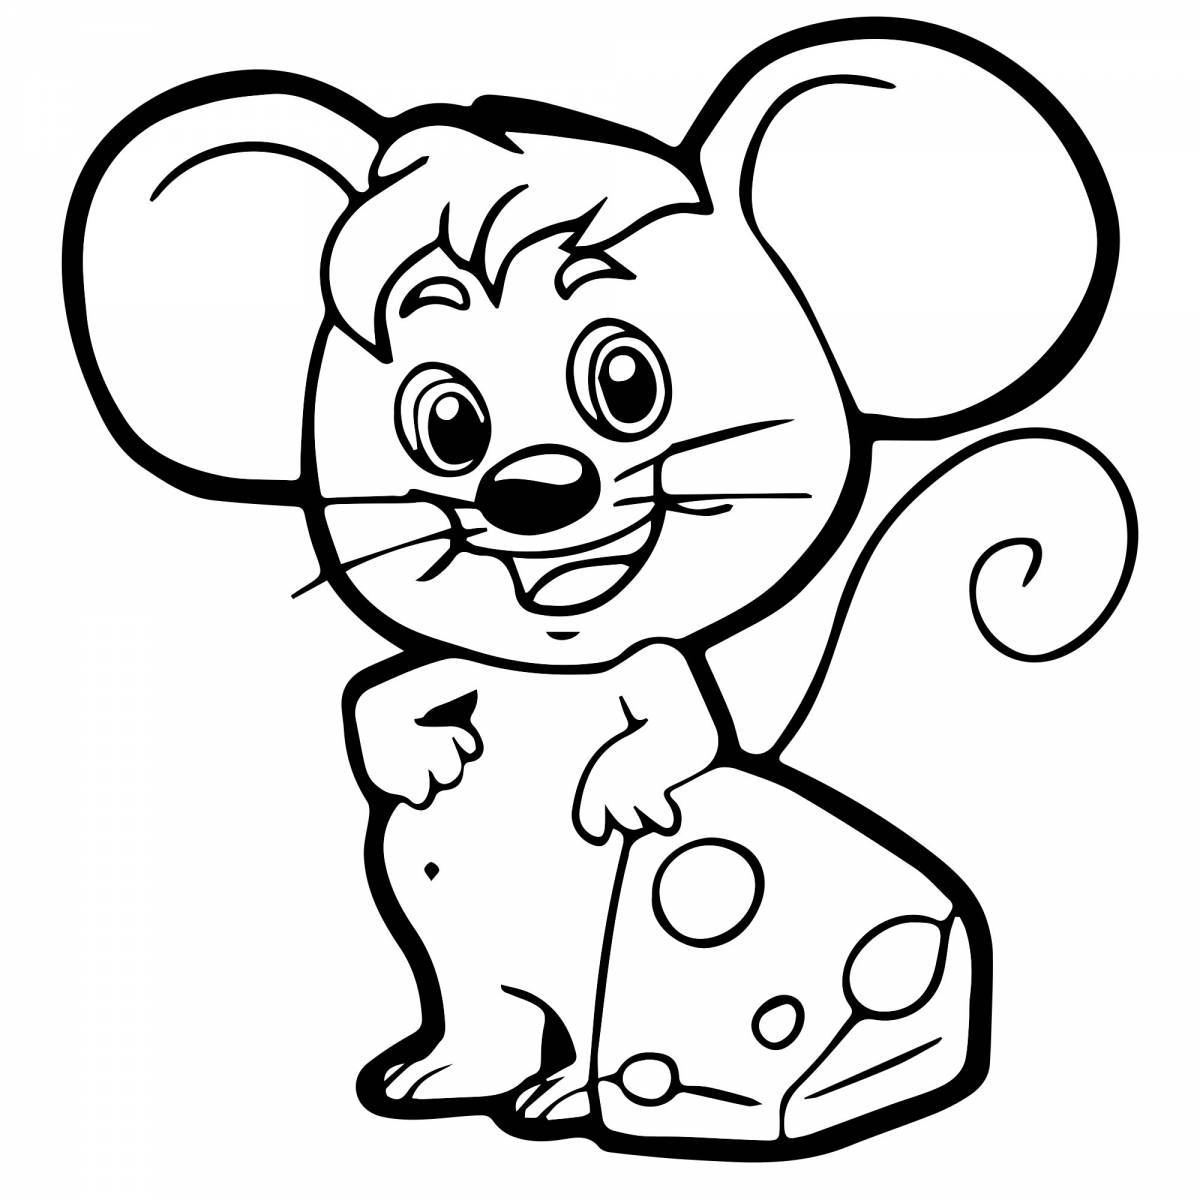 Exciting mouse coloring book for kids